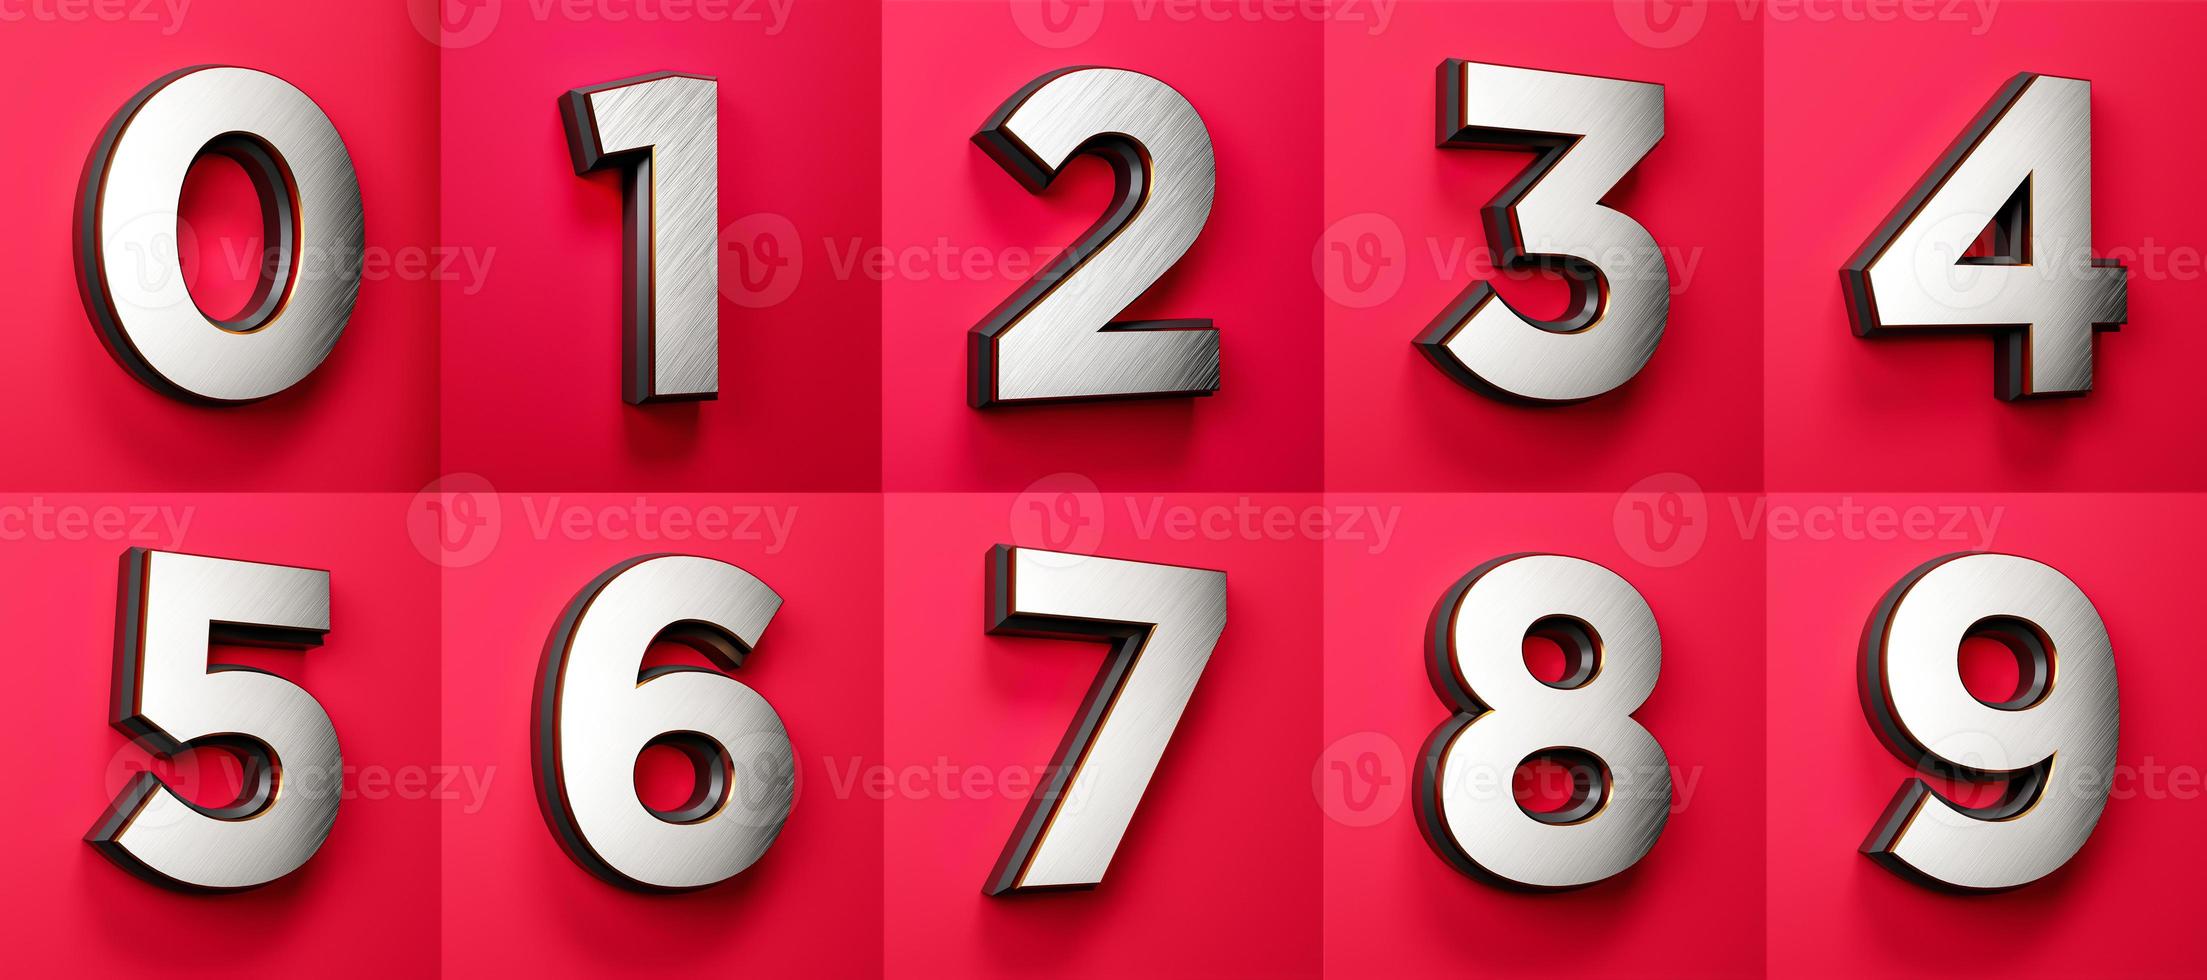 0, 1, 2, 3, 4, 5, 6, 7, 8, 9, white silver foil numbers Black border set on a red background in 3d rendering photo